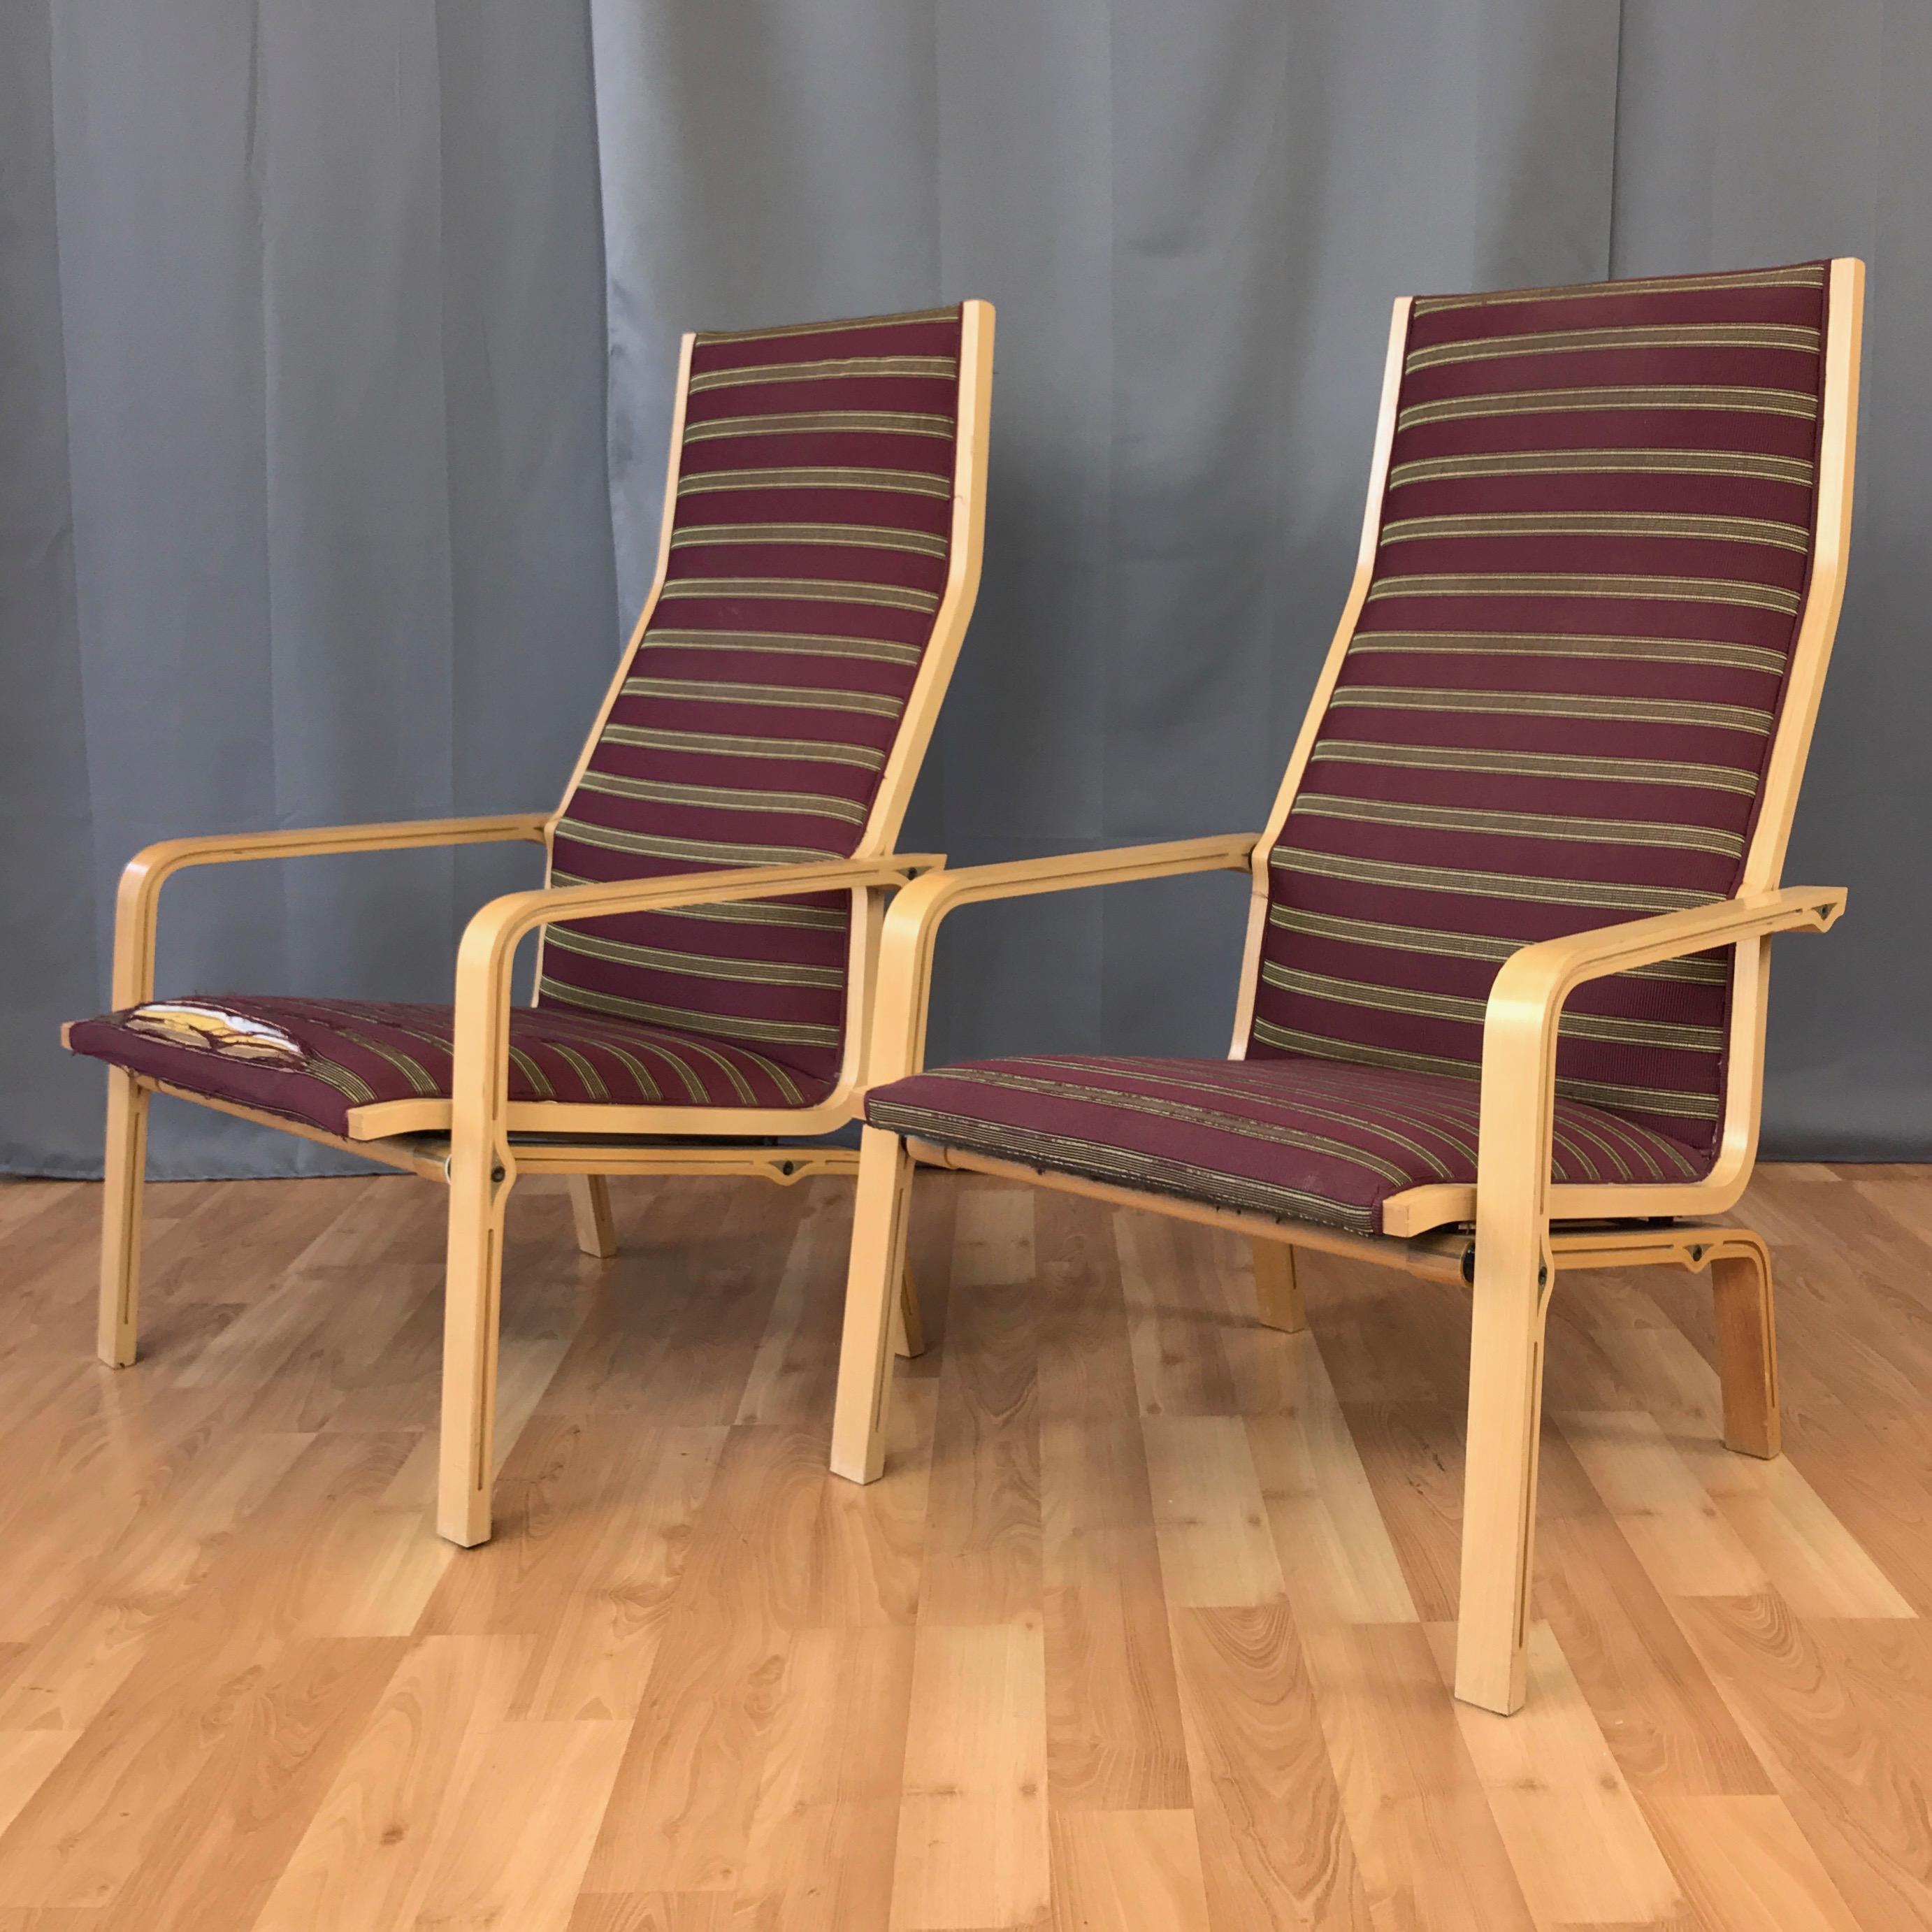 A pair of rare model 4335 high-back lounge chairs designed by Arne Jacobsen for St Catherine’s College in 1962, and produced by Fritz Hansen in 1988.

Famed architect and designer Jacobsen’s holistic makeover of historic St Catherine’s College in